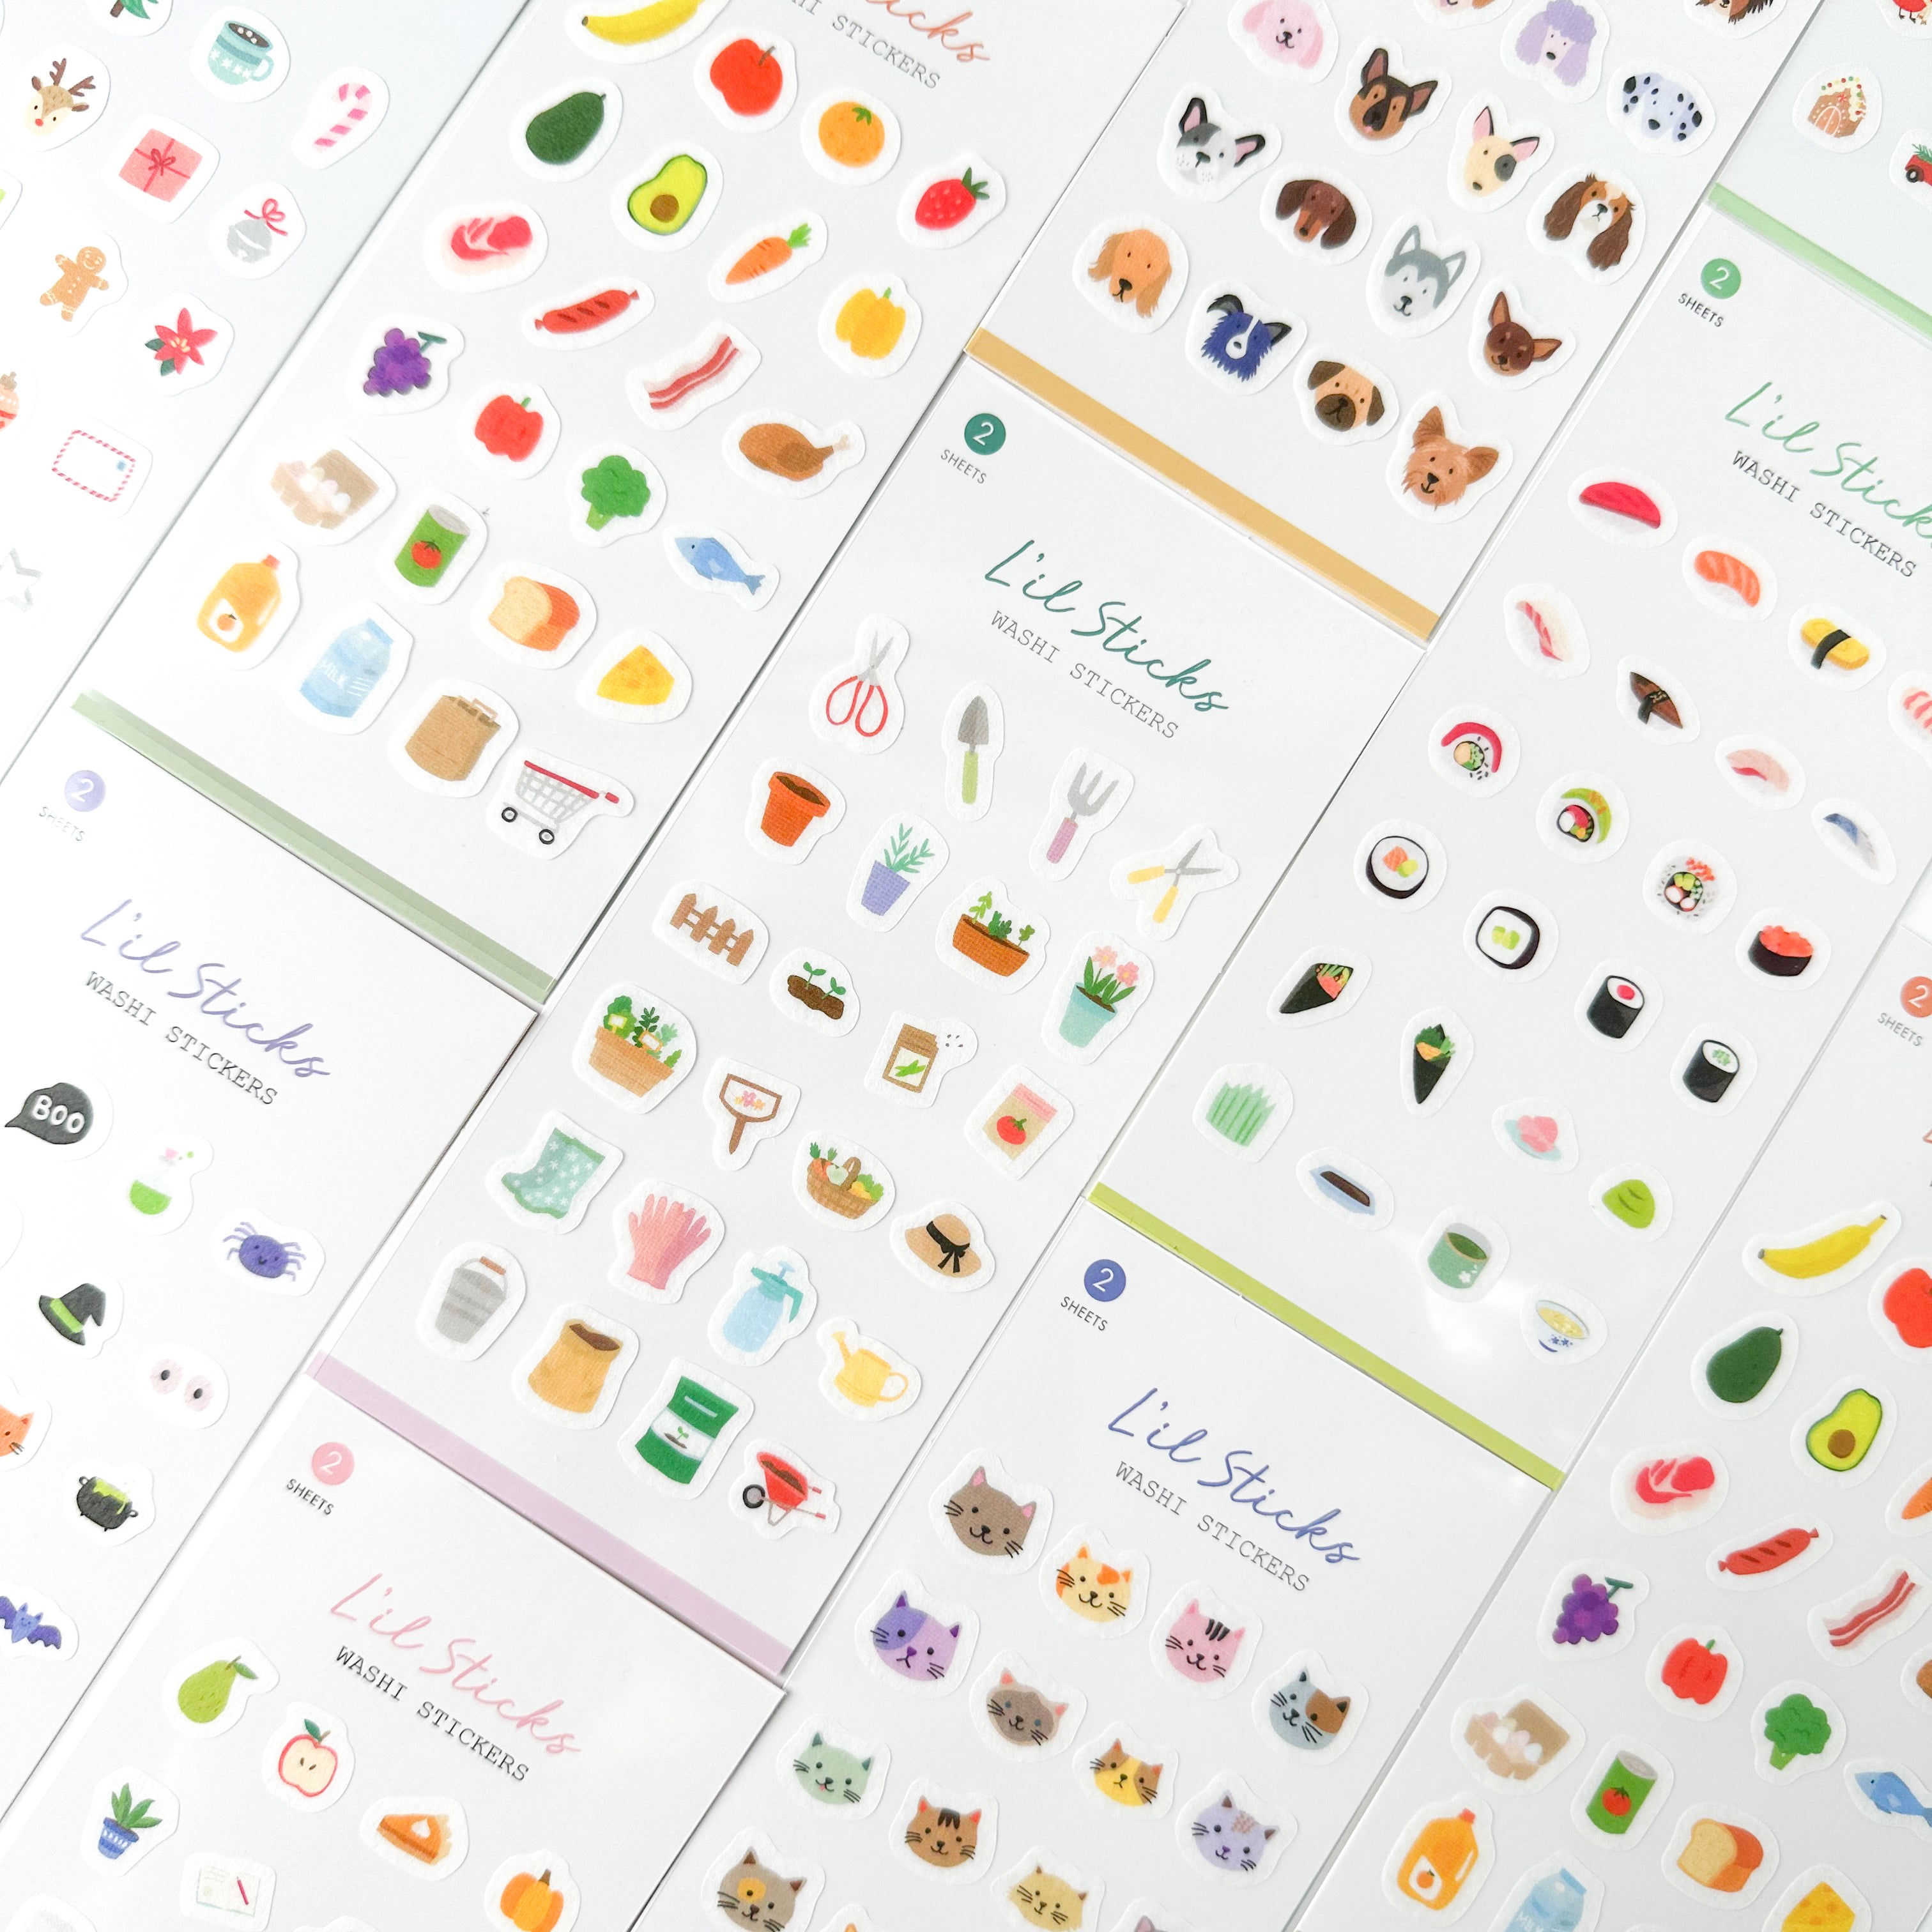 These stickers are carefully crafted with intricate details, offering a charming assortment of designs that are ideal for planning, marking important events, or adding decorative touches to your pages. These are from Girl of all Work and sold at BBB Supplies Craft Shop.